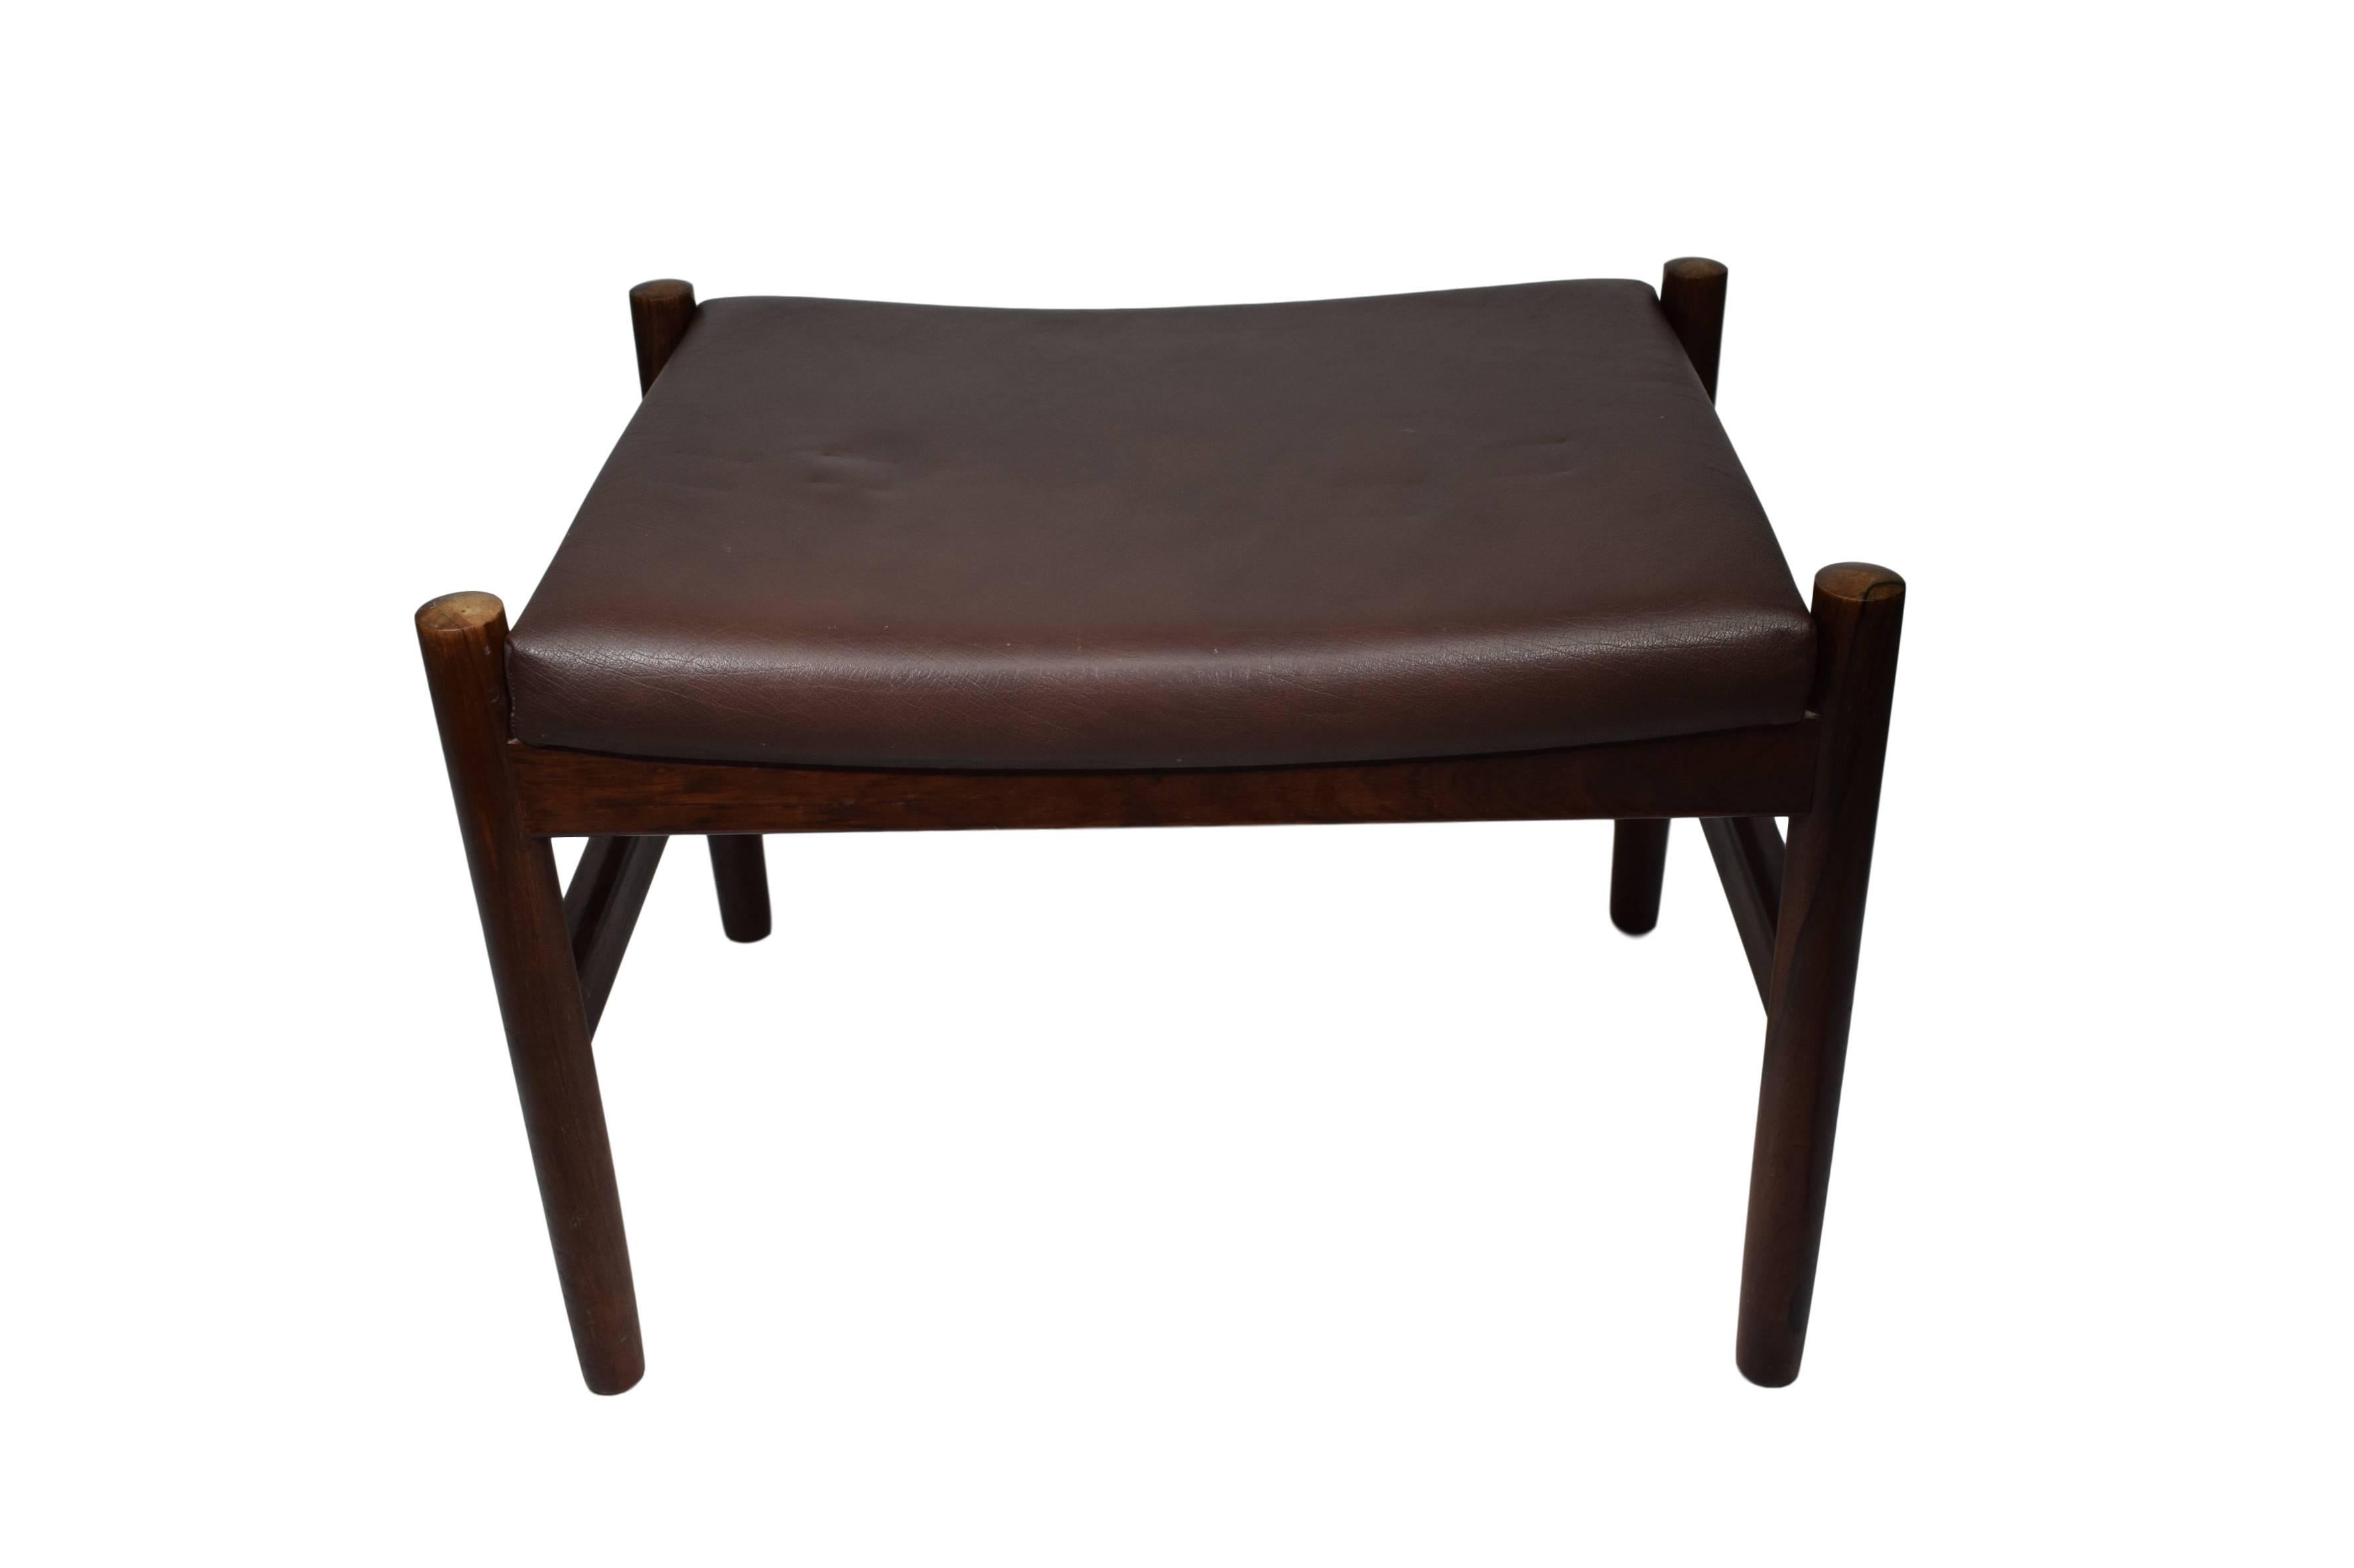 Danish Midcentury Rosewood Ottoman by Spøttrup, Brown Leather, Stamped In Good Condition For Sale In Denmark, DK